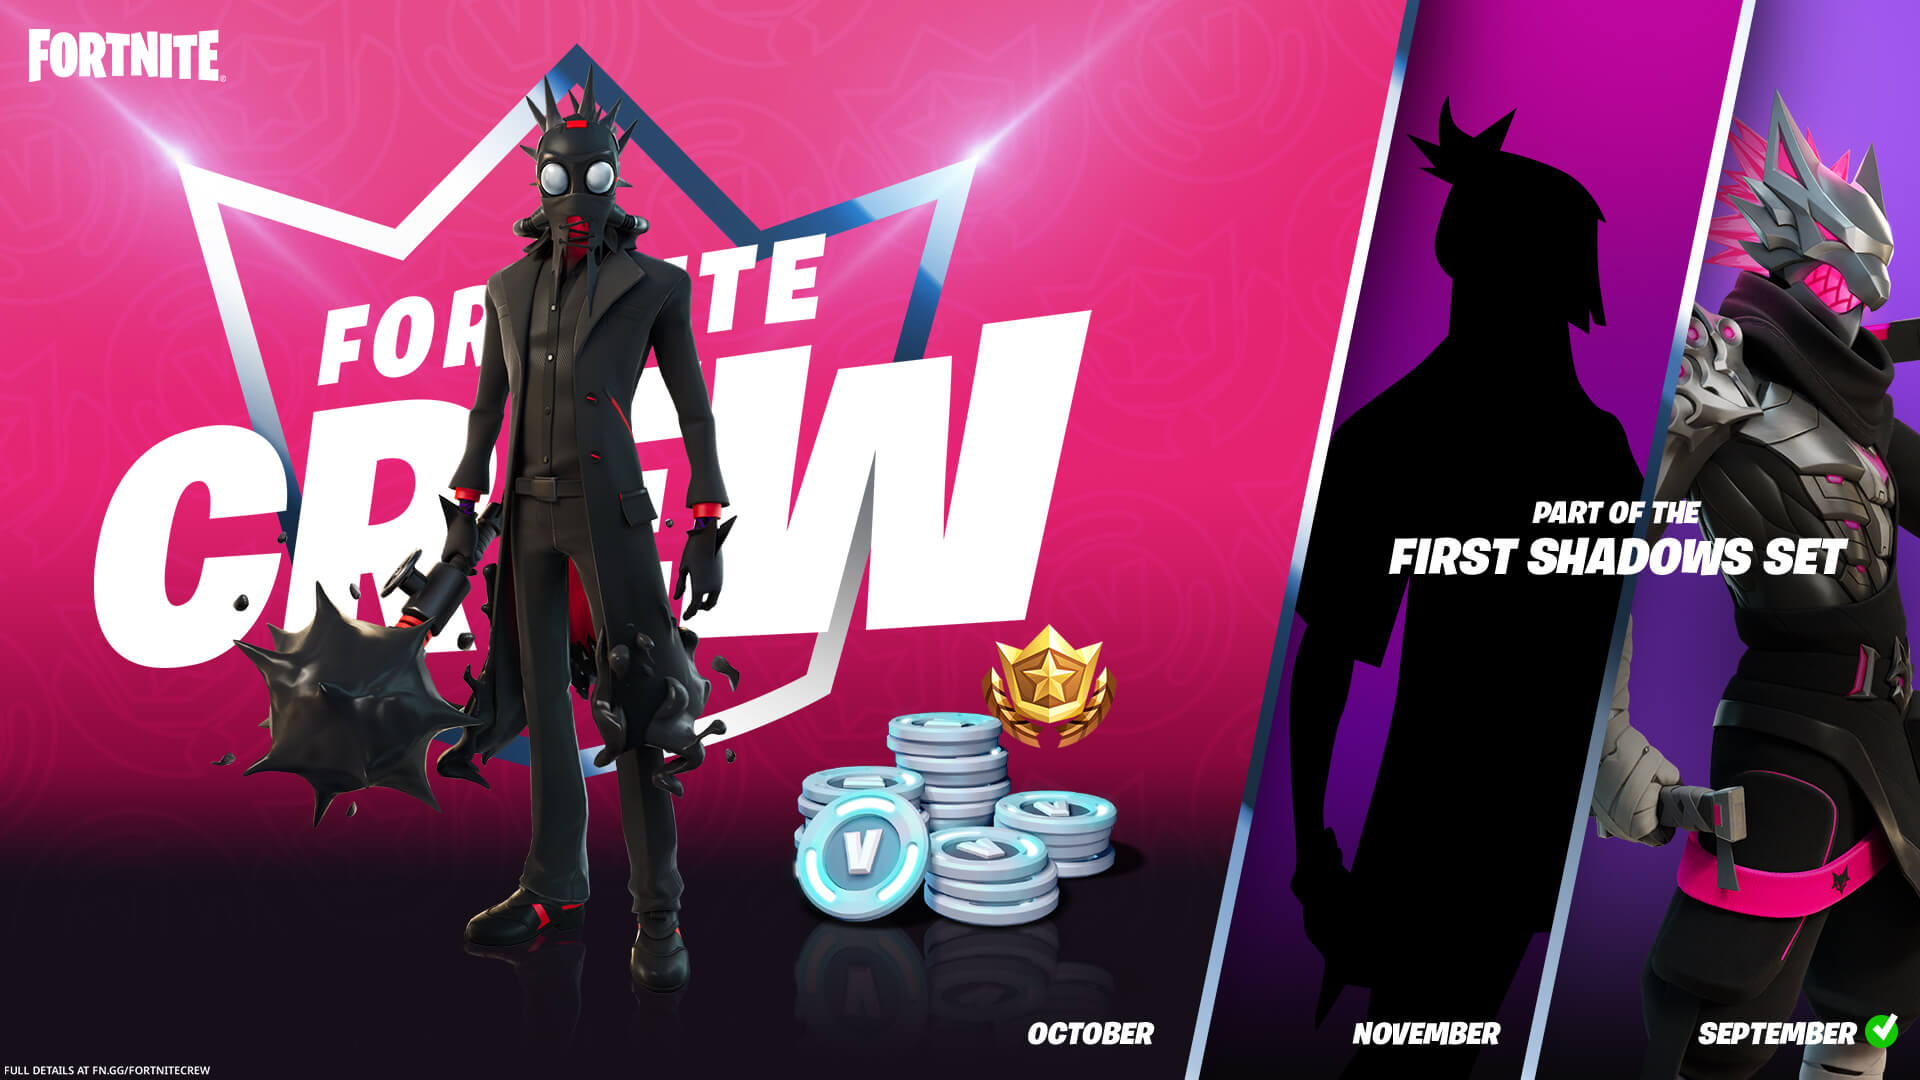 Fortnite Crew for October includes the second of The First Shadows EGM